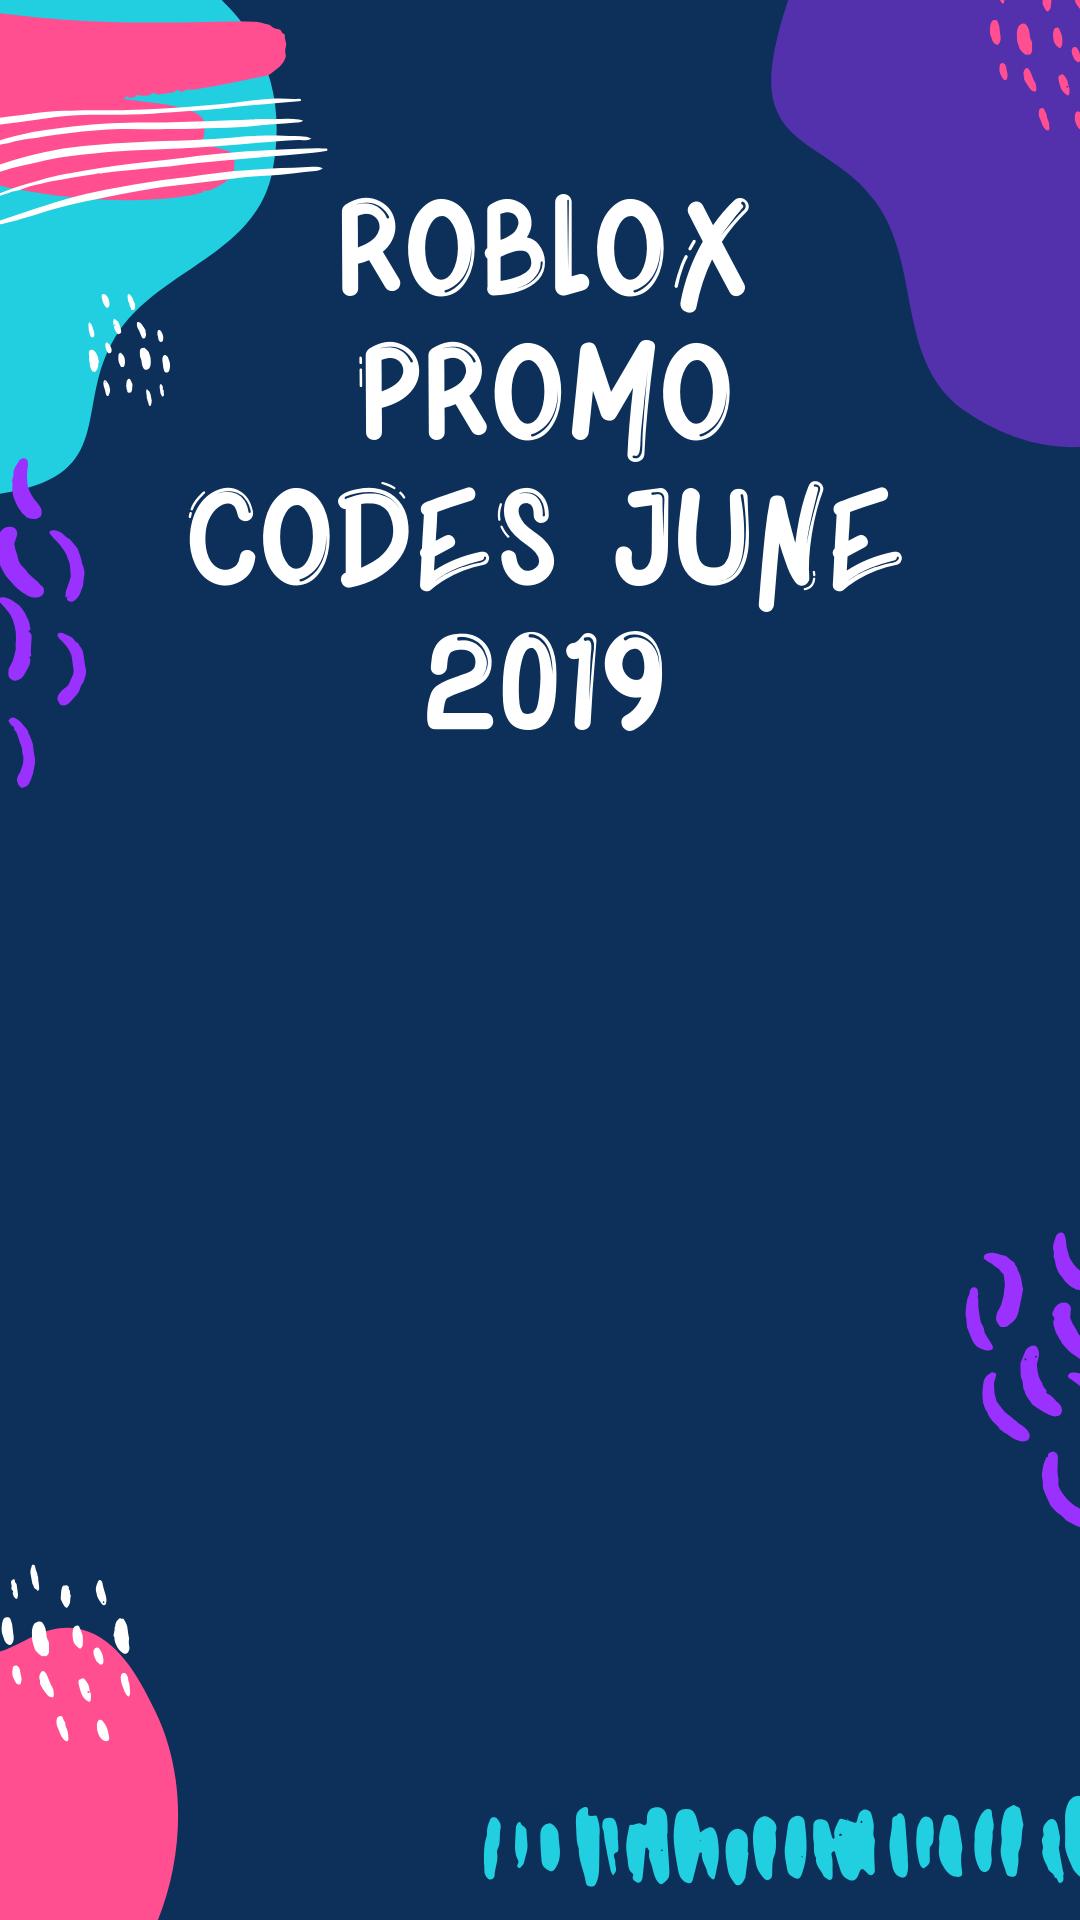 Roblox Promo Codes 2020 On Twitter Roblox Working Promo Code June 2019 Spider Cola Just Enter Promo Code Spidercola Click Here To Get All New Roblox Promo Codes Today S Link Https T Co Co1ltinps5 Robloxnew - roblox promo codes june 29 2019